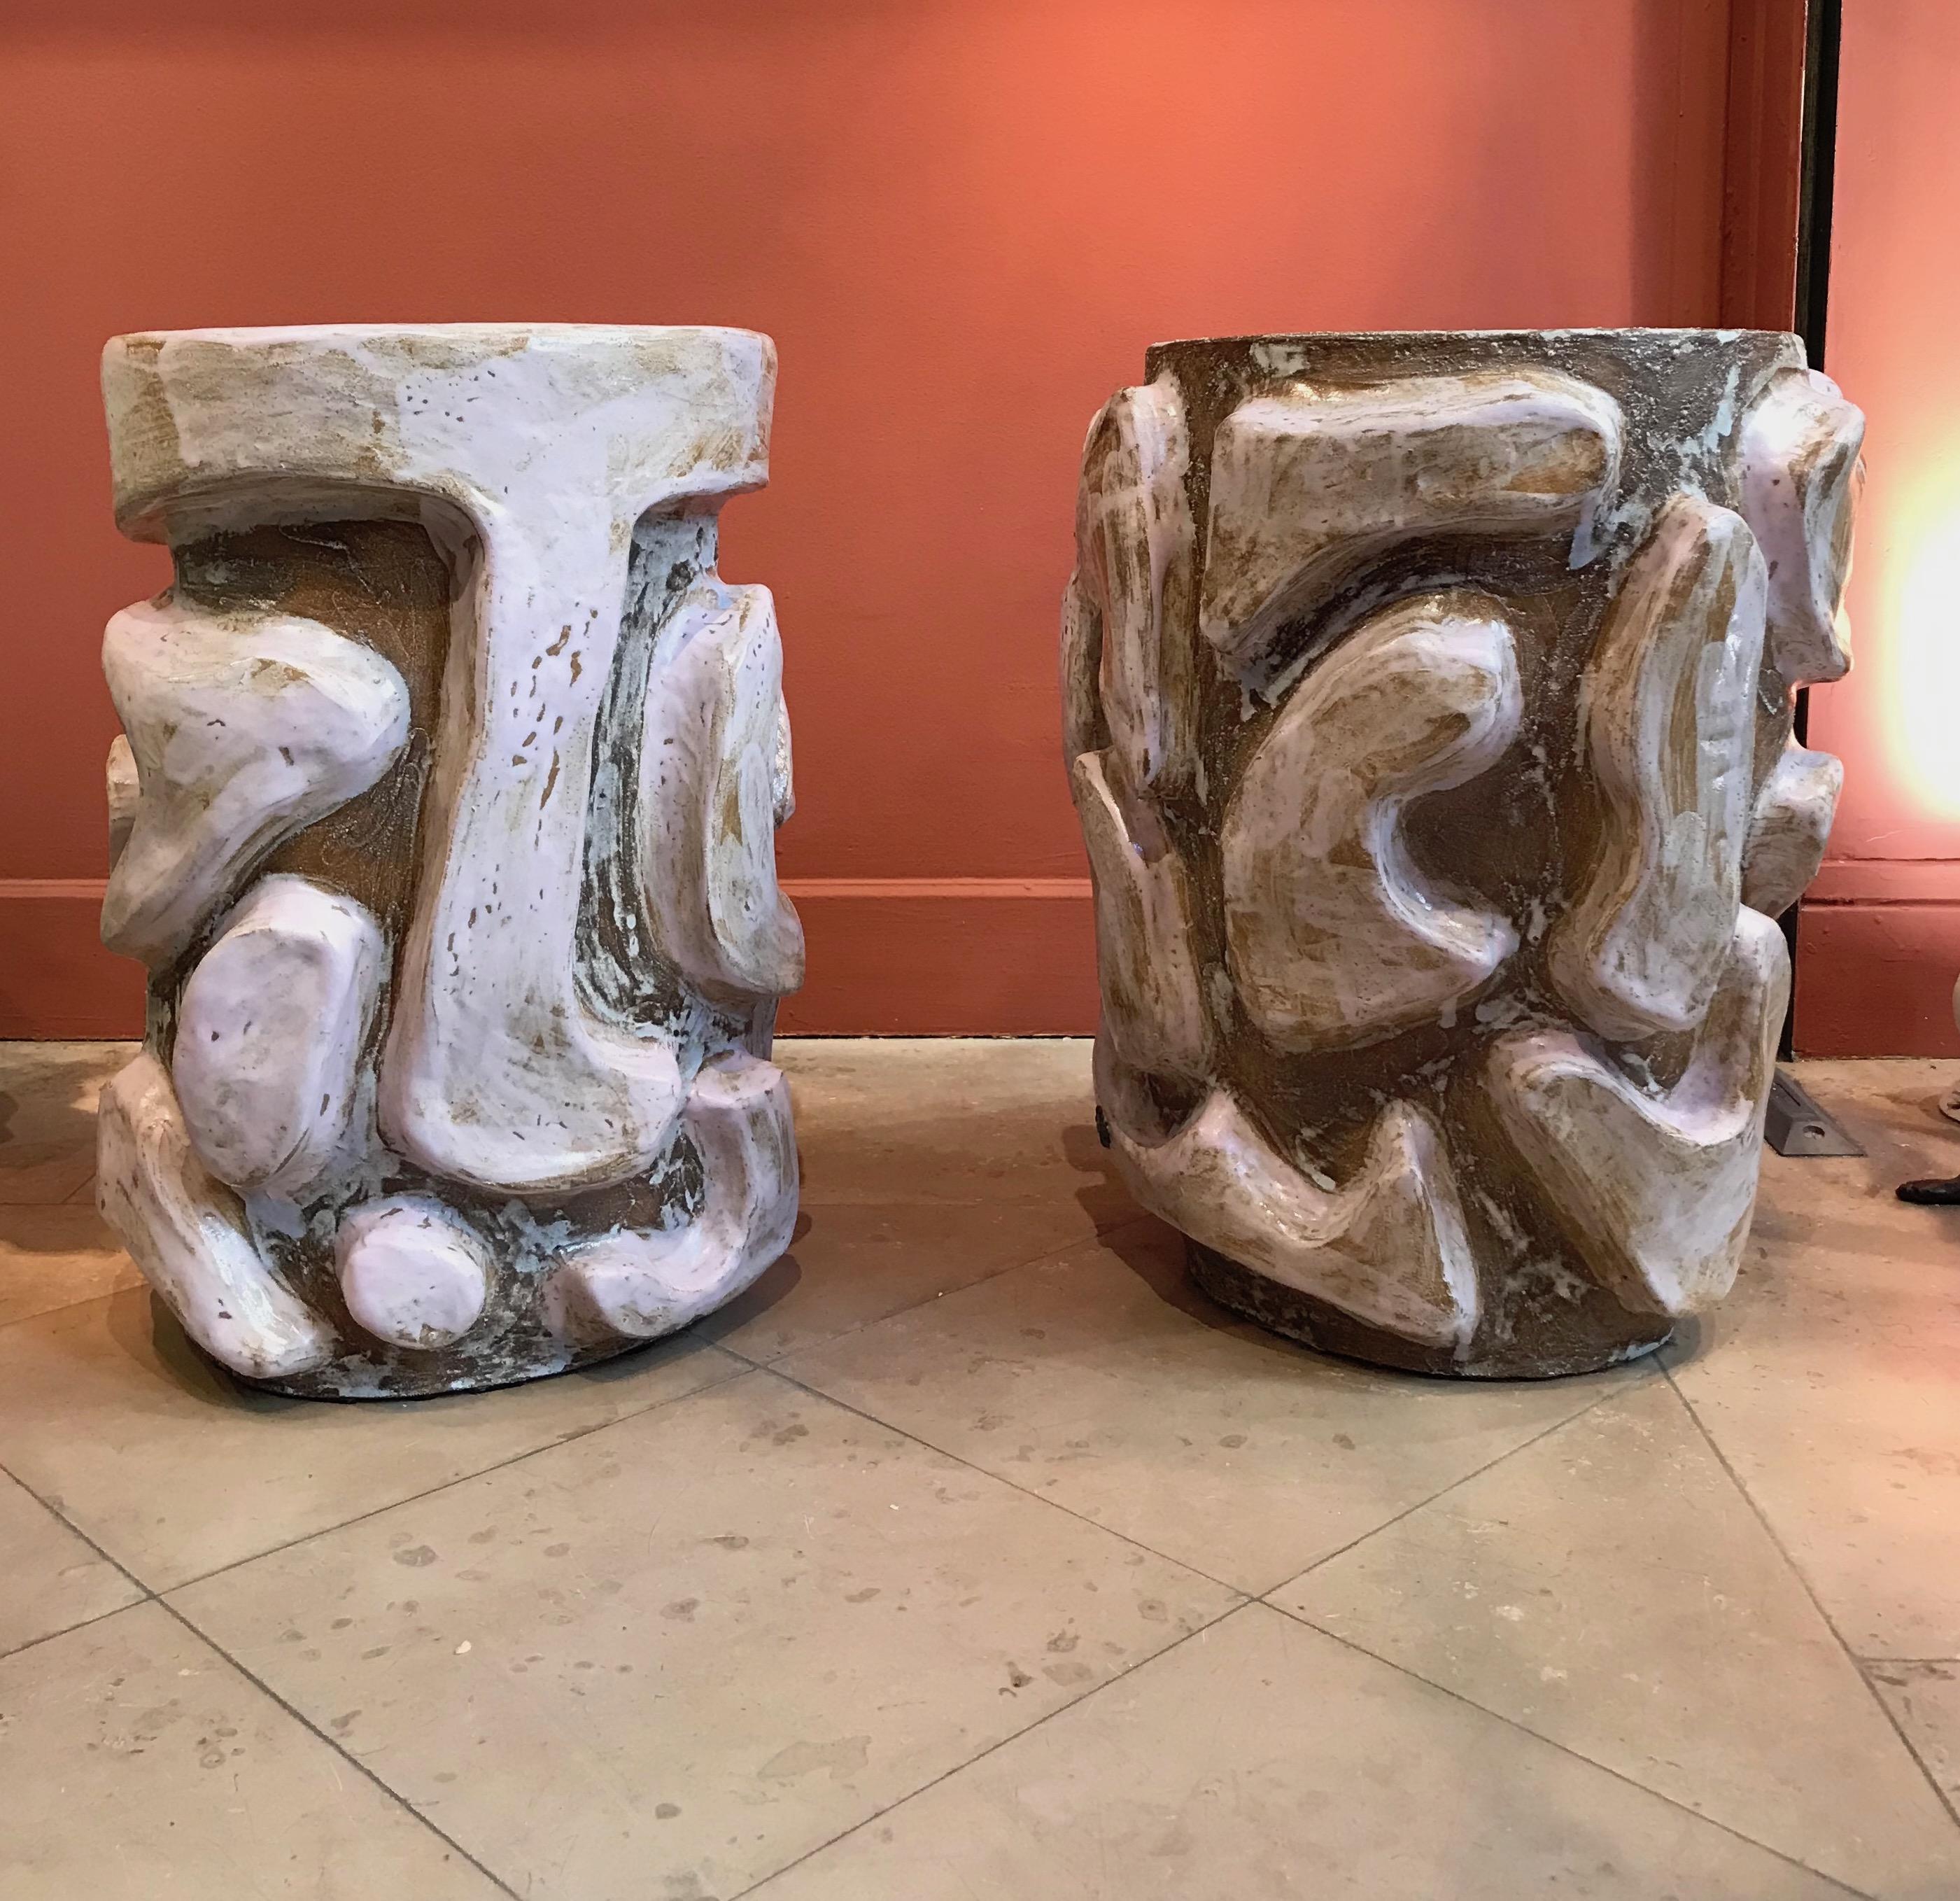 Alice Gavalet 2018, pair of unique side tables, enameled sandstones, measures: Height 50 cm, diameter of top 35 cm, unique piece, signed.
Alice Gavalet
Born in 1978, lives and works in France.
Education
2003 ?Diploma in Industrial Design, Ecole